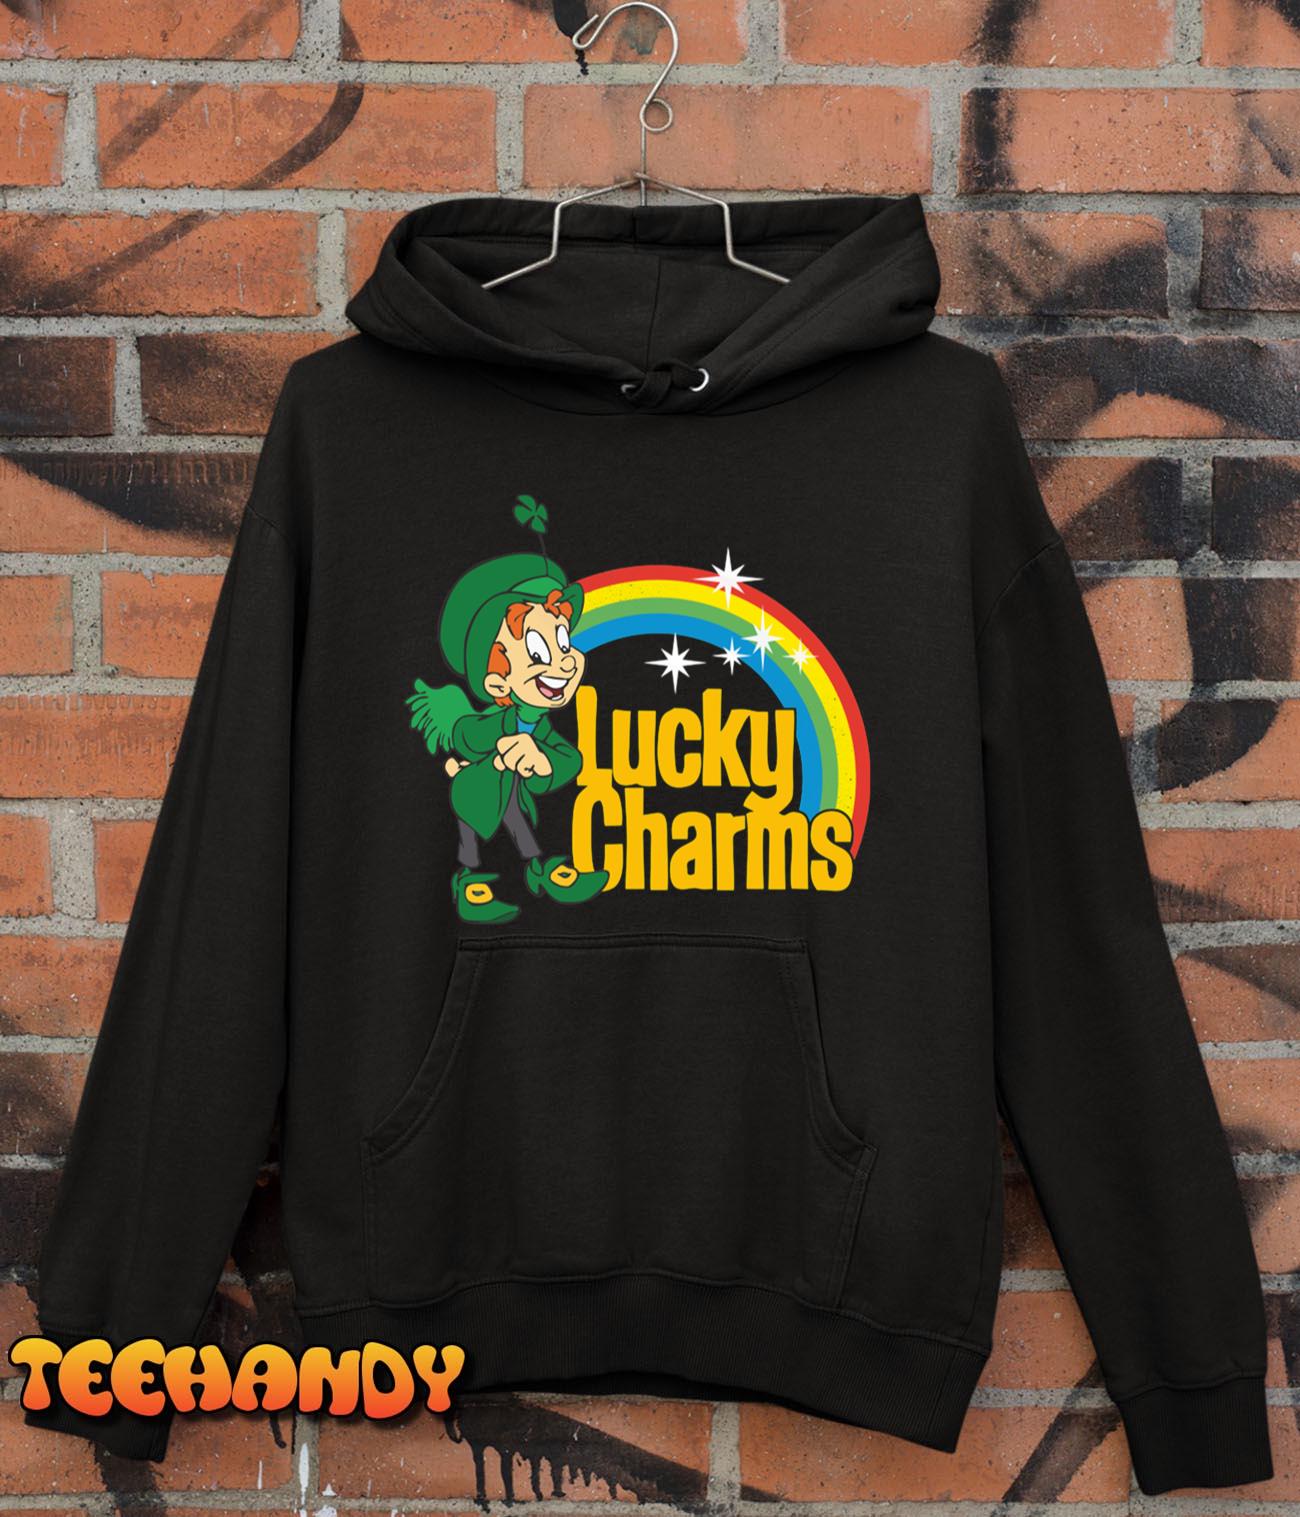 LUCKY CHARMS T-Shirt